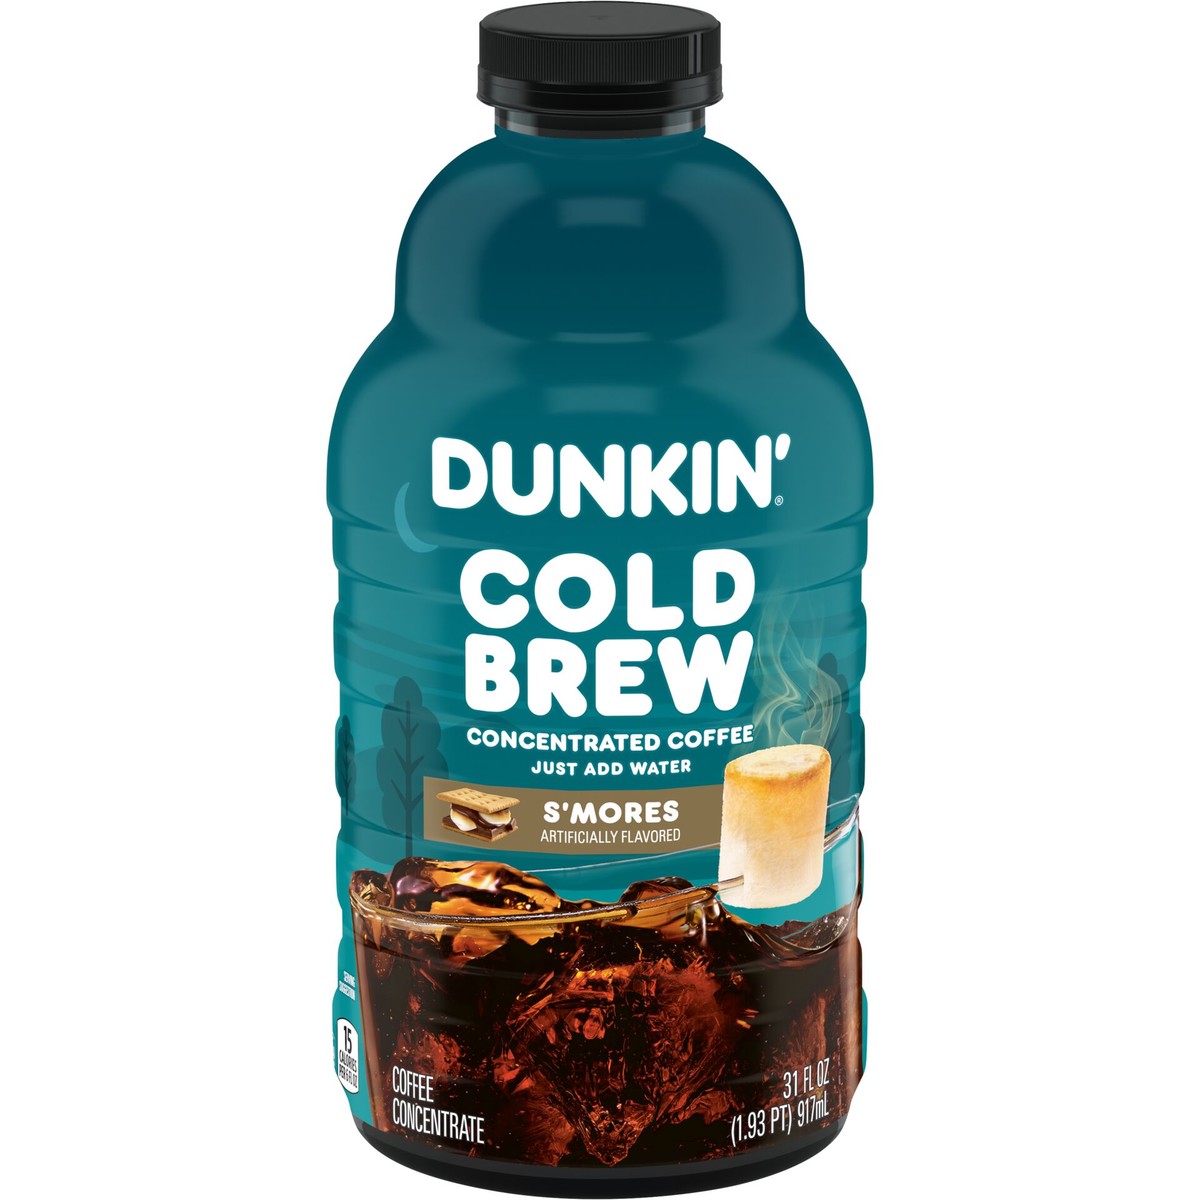 Dunkin’ S’mores Artificially Flavored Cold Brew Concentrate